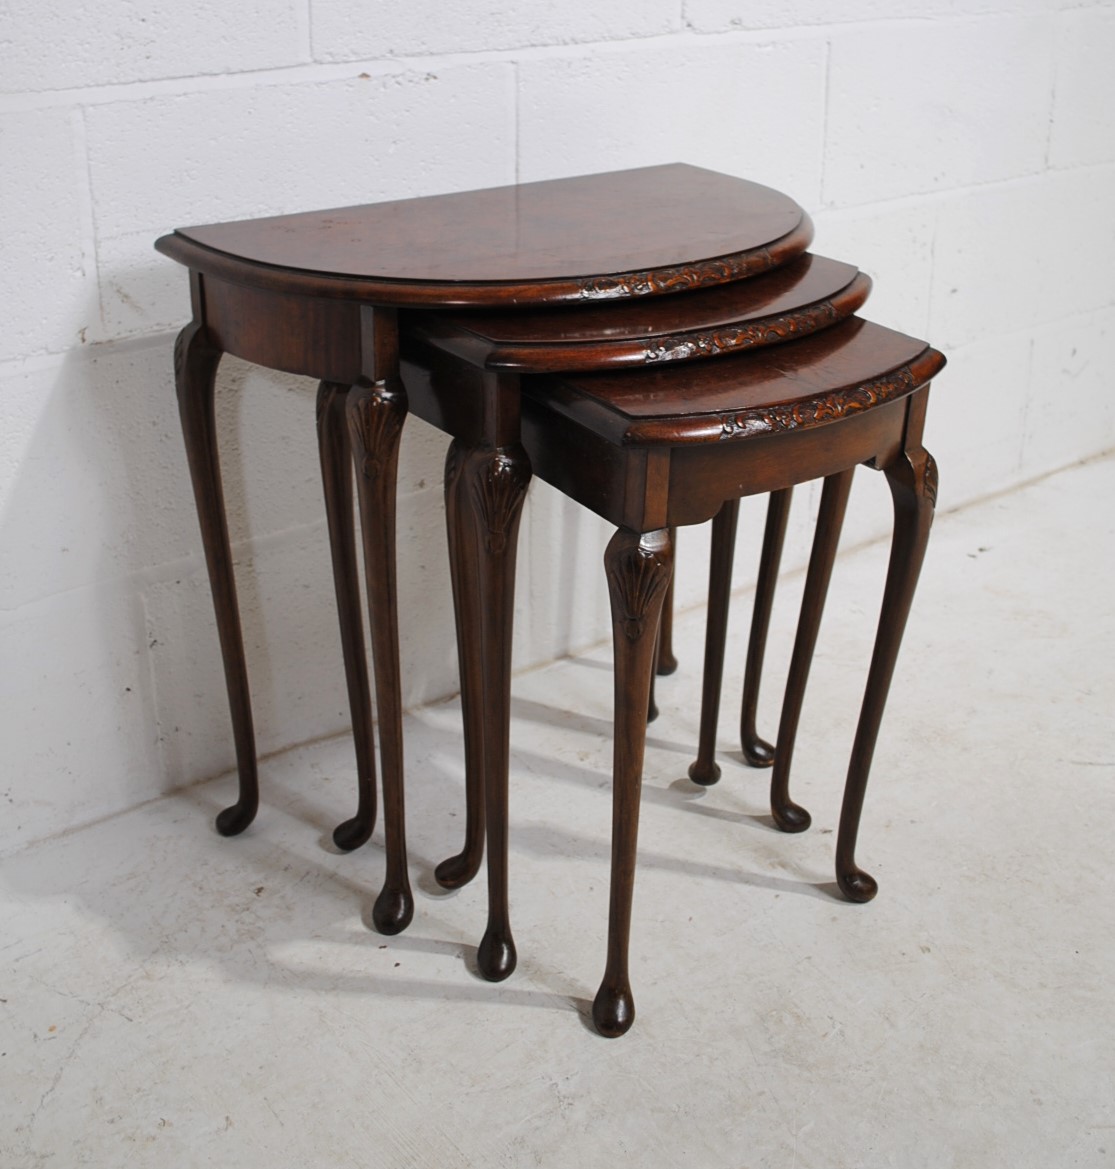 A walnut veneered nest of three demi-lune tables, with carved decoration, raised in cabriole legs - Image 4 of 6